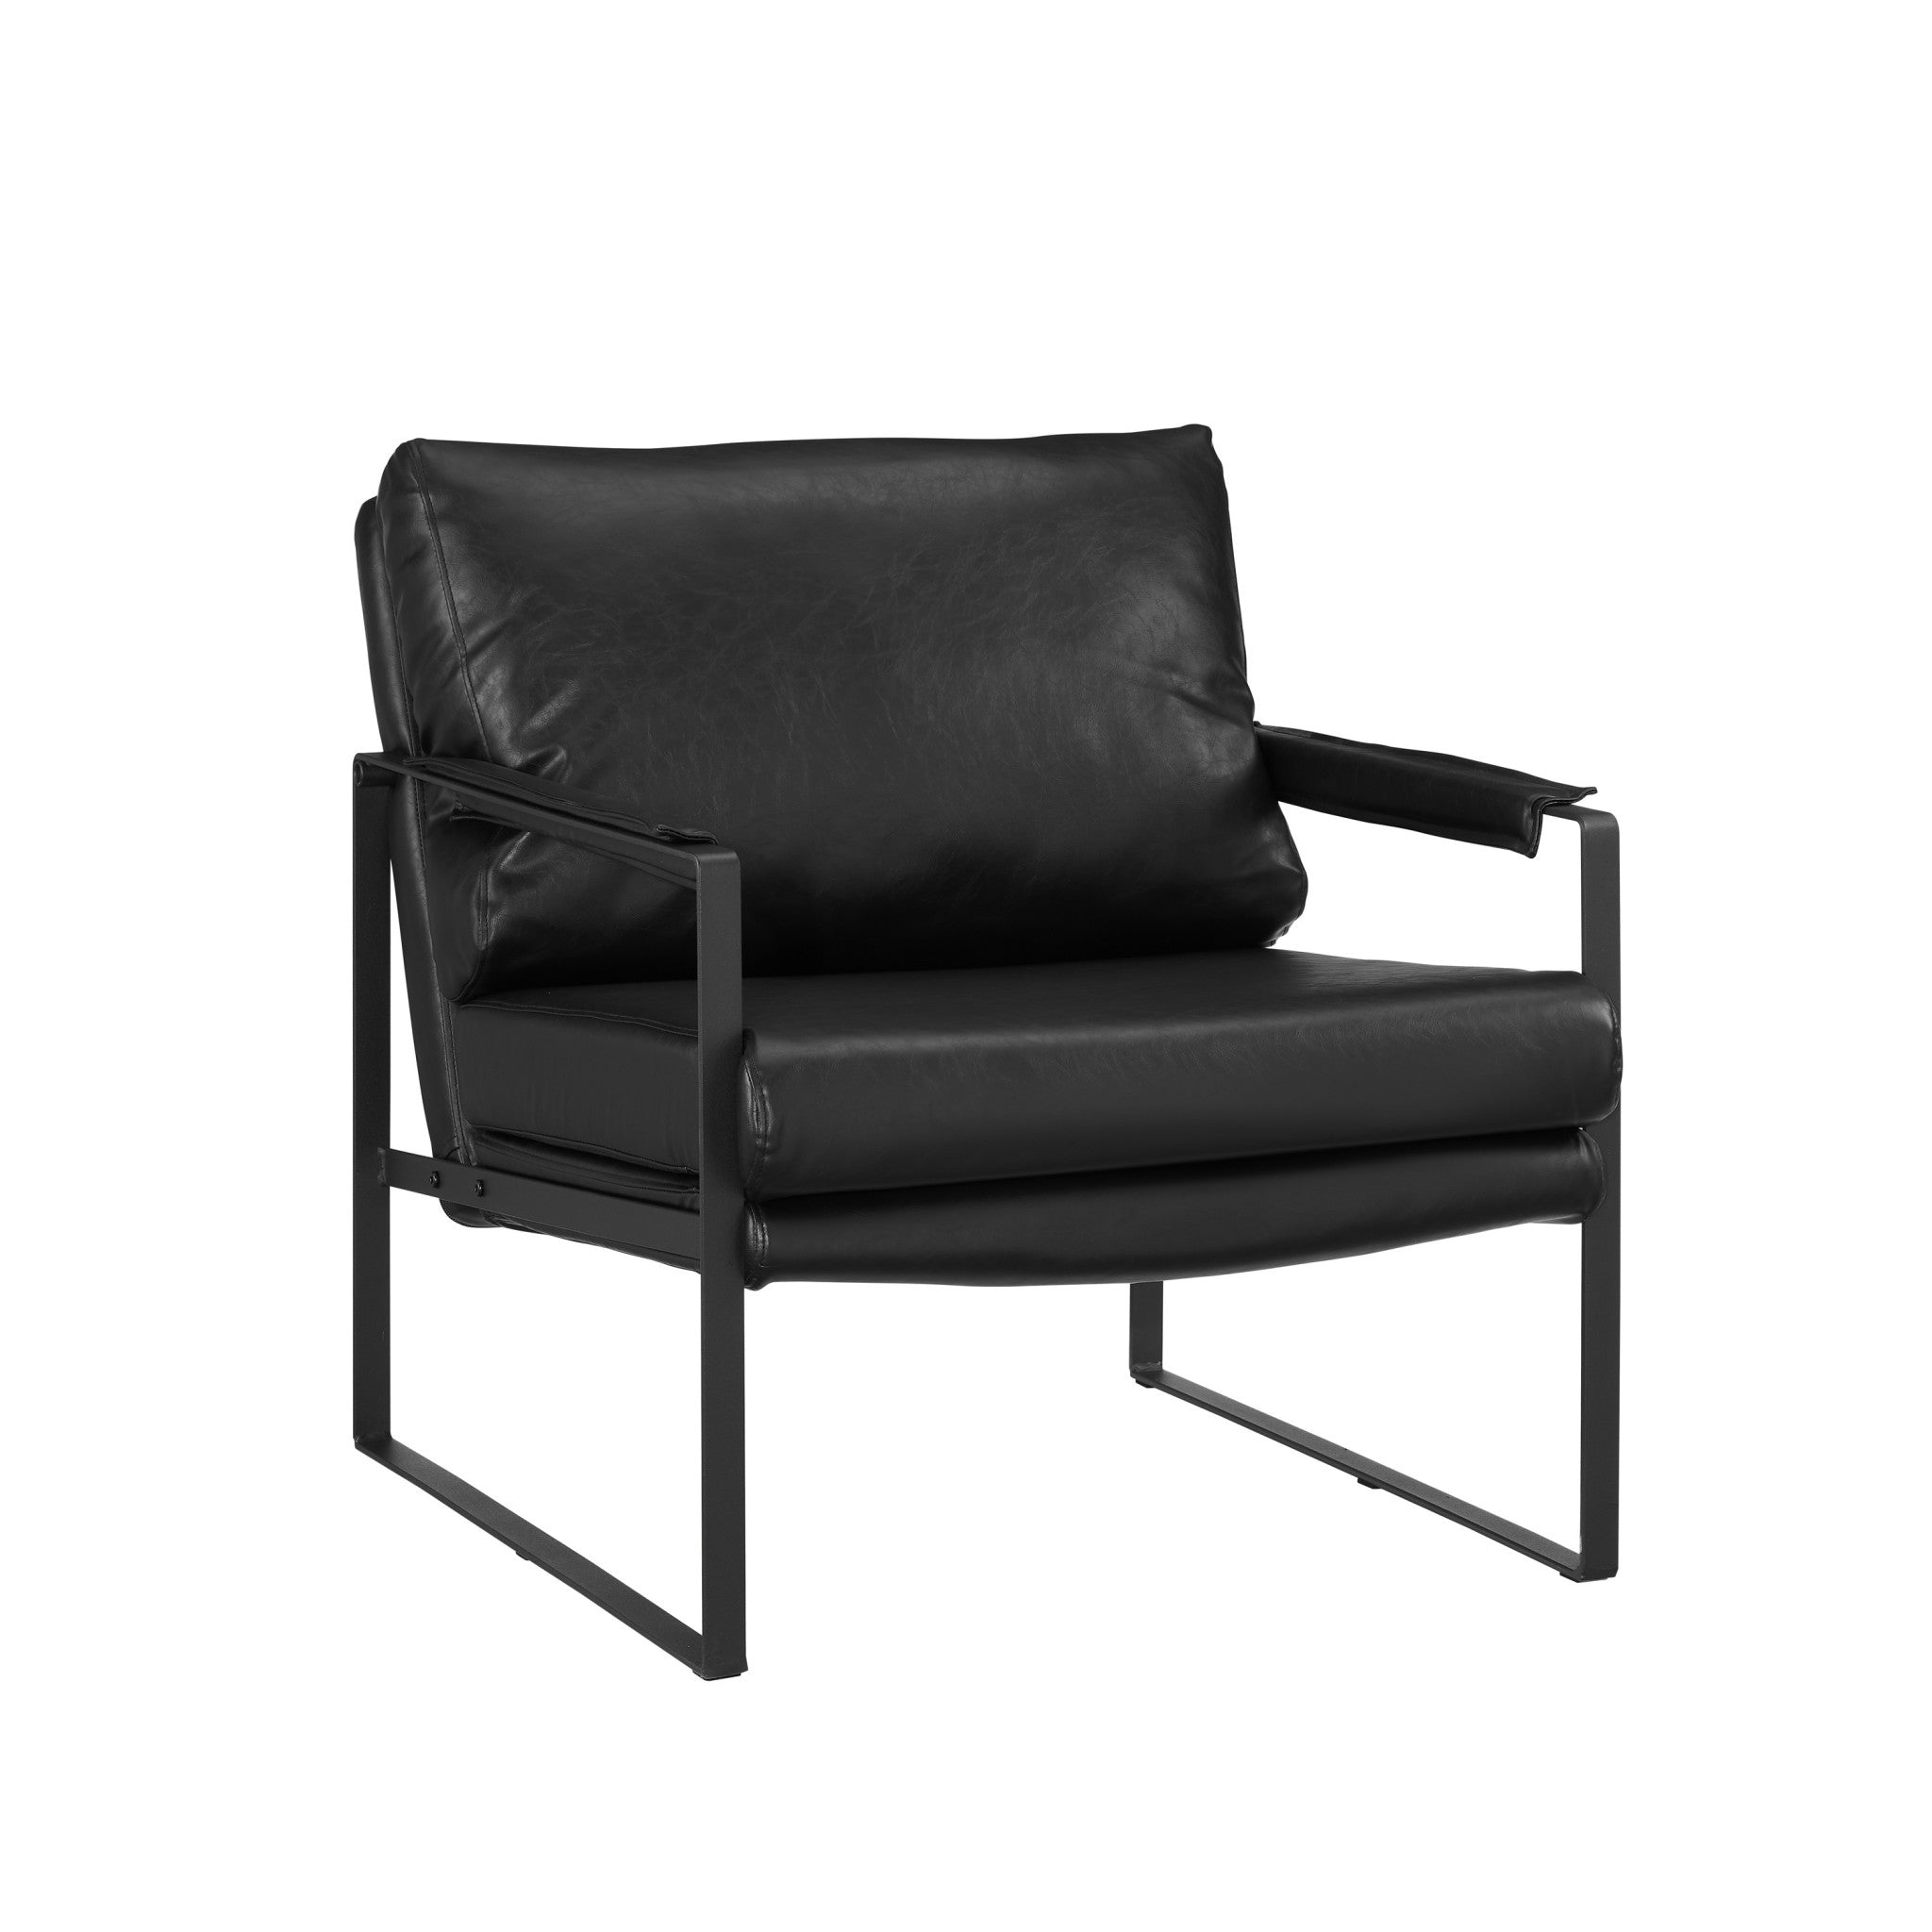 27" Black Faux Leather and Metal Arm Chair